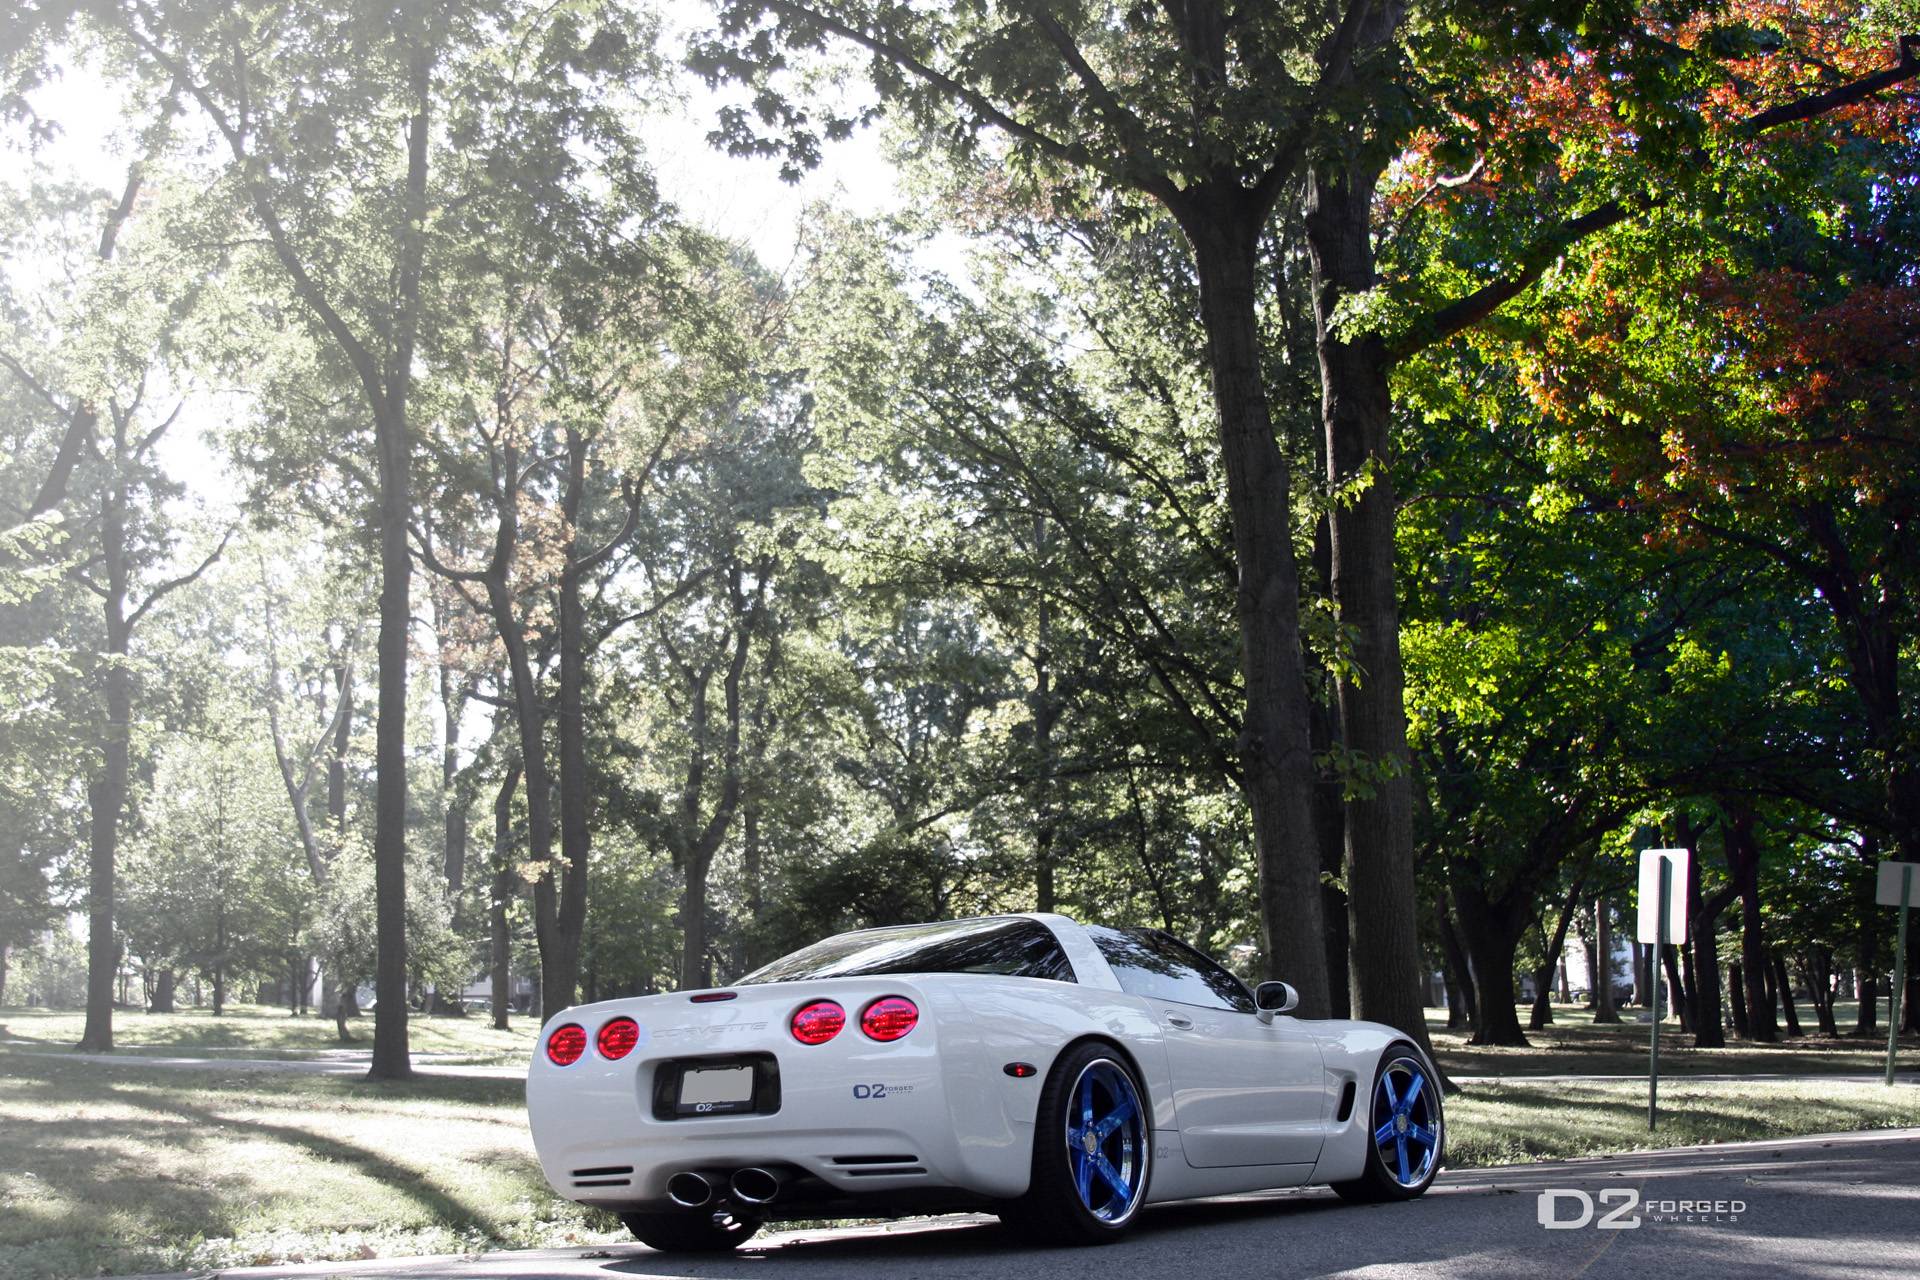 Sunday Wallpaper: Corvette C5 on D2FORGED CV2 Wheels. TheD2Life